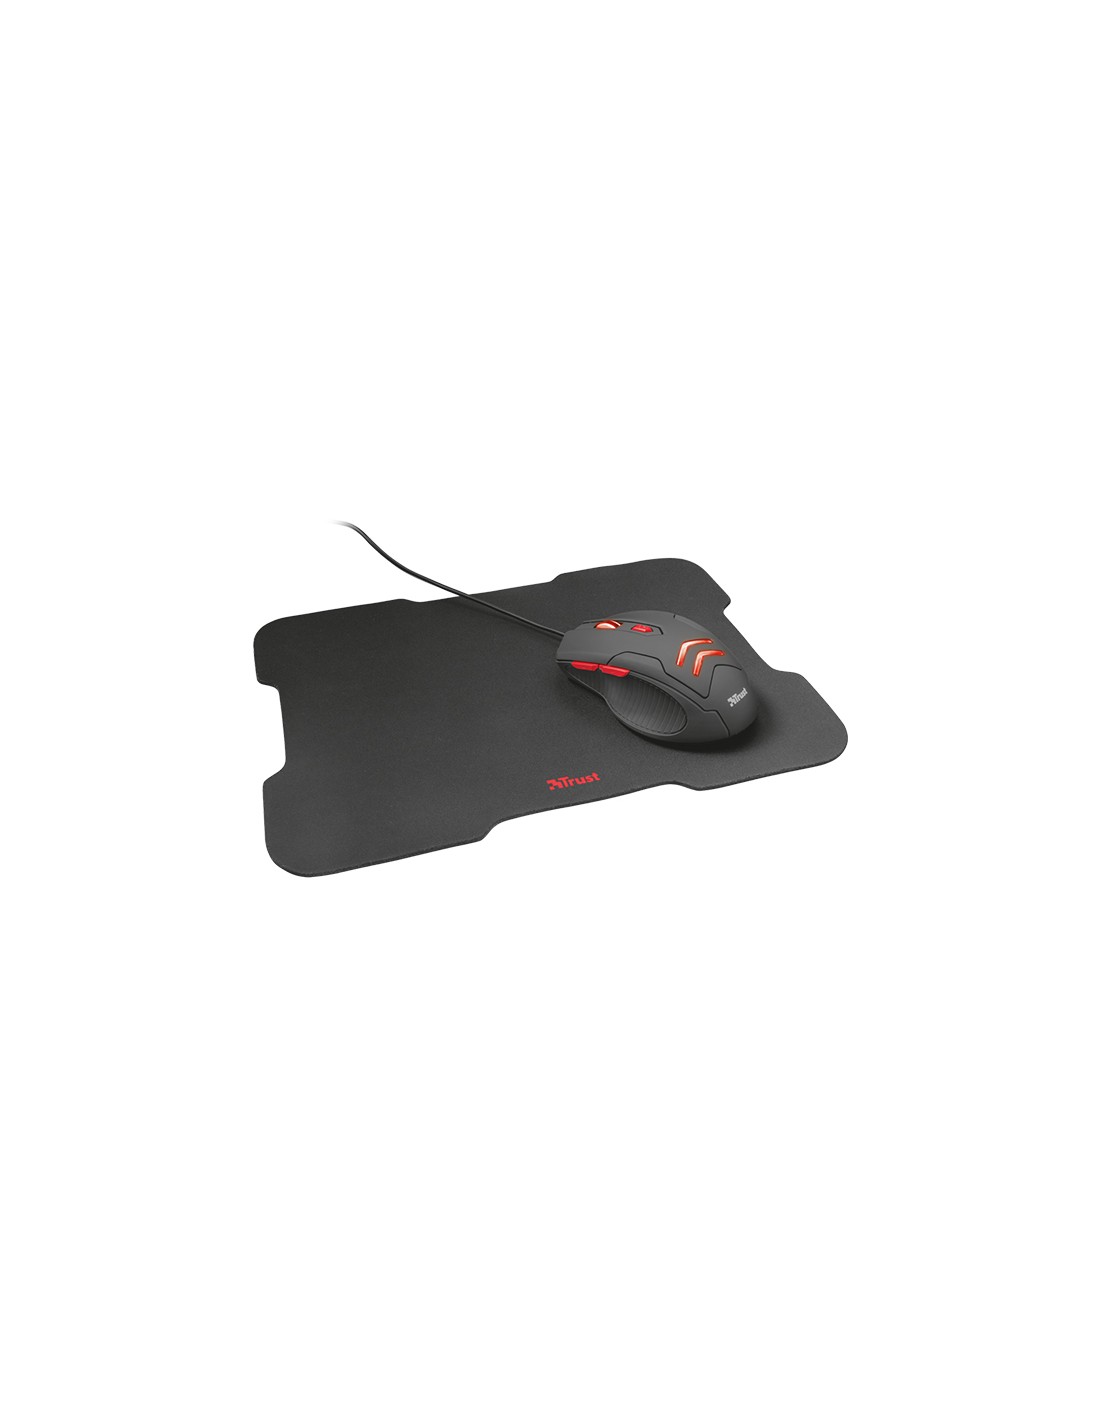 Trust Ziva Gaming Mouse With Mousepad